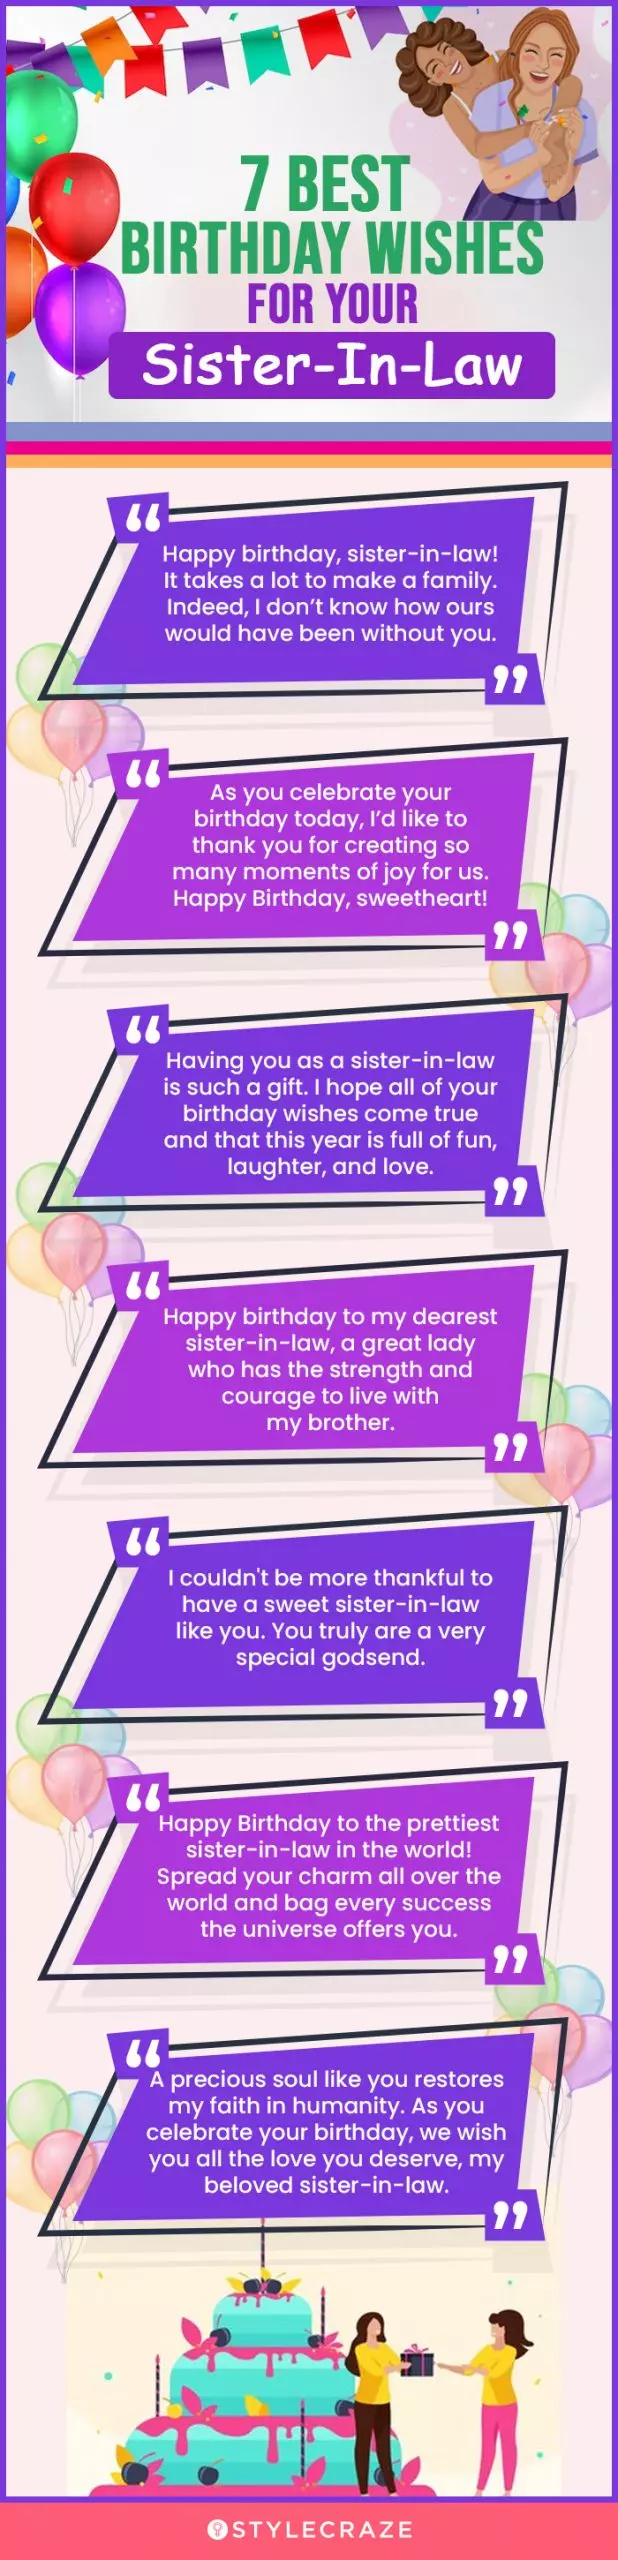 7 best birthday wishes for your sister in law (infographic)